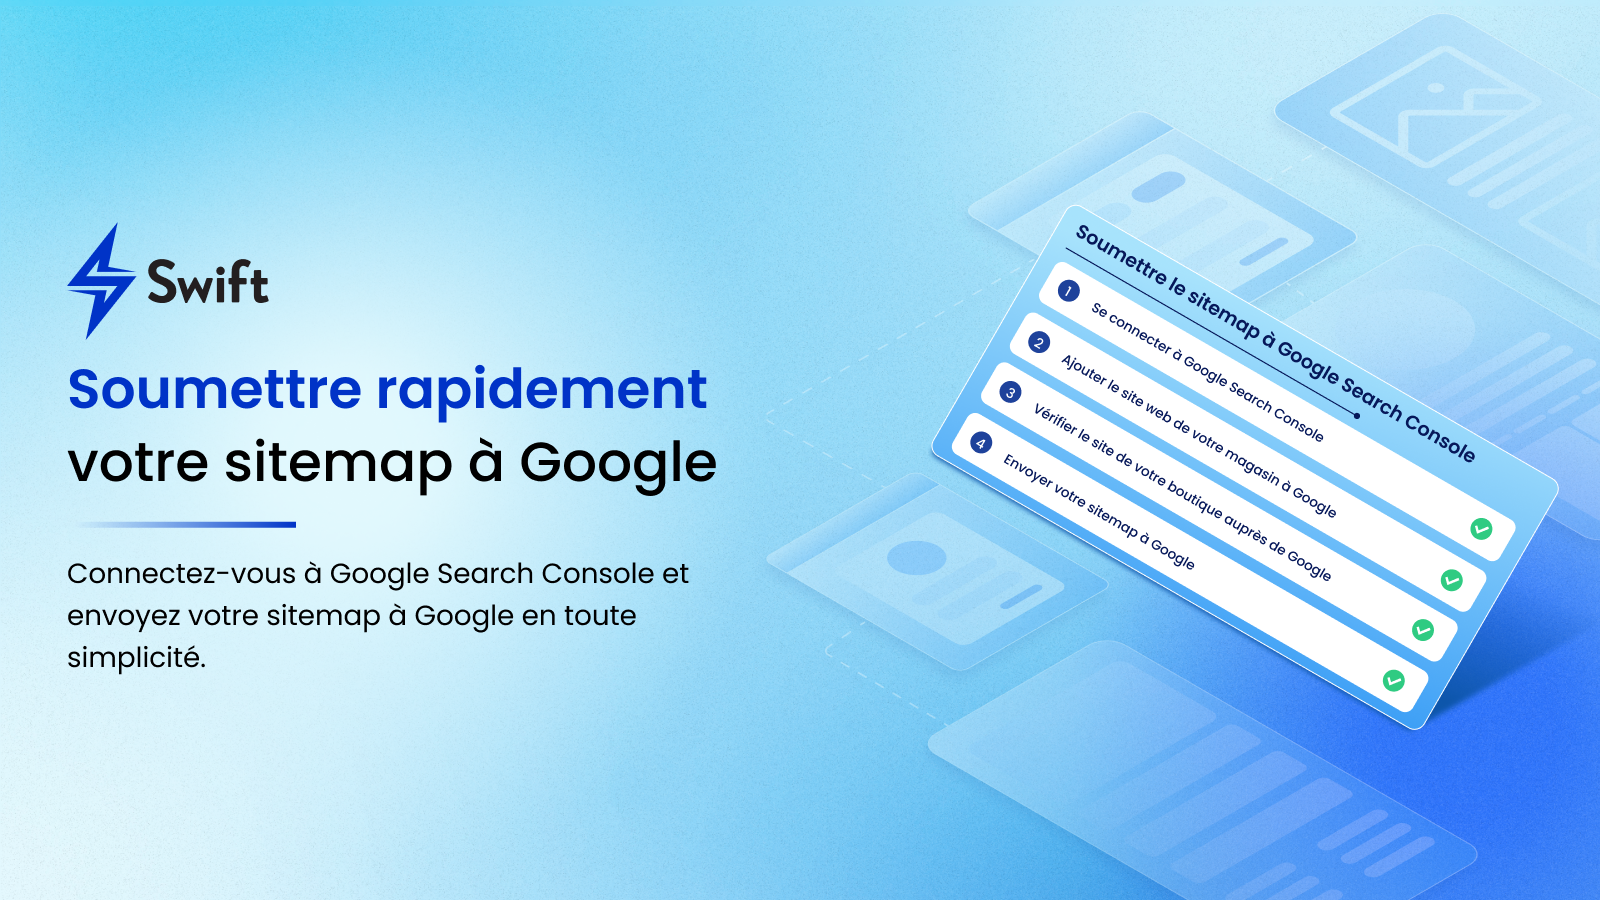 Submit your sitemap to Google to optimize Google Page Speed